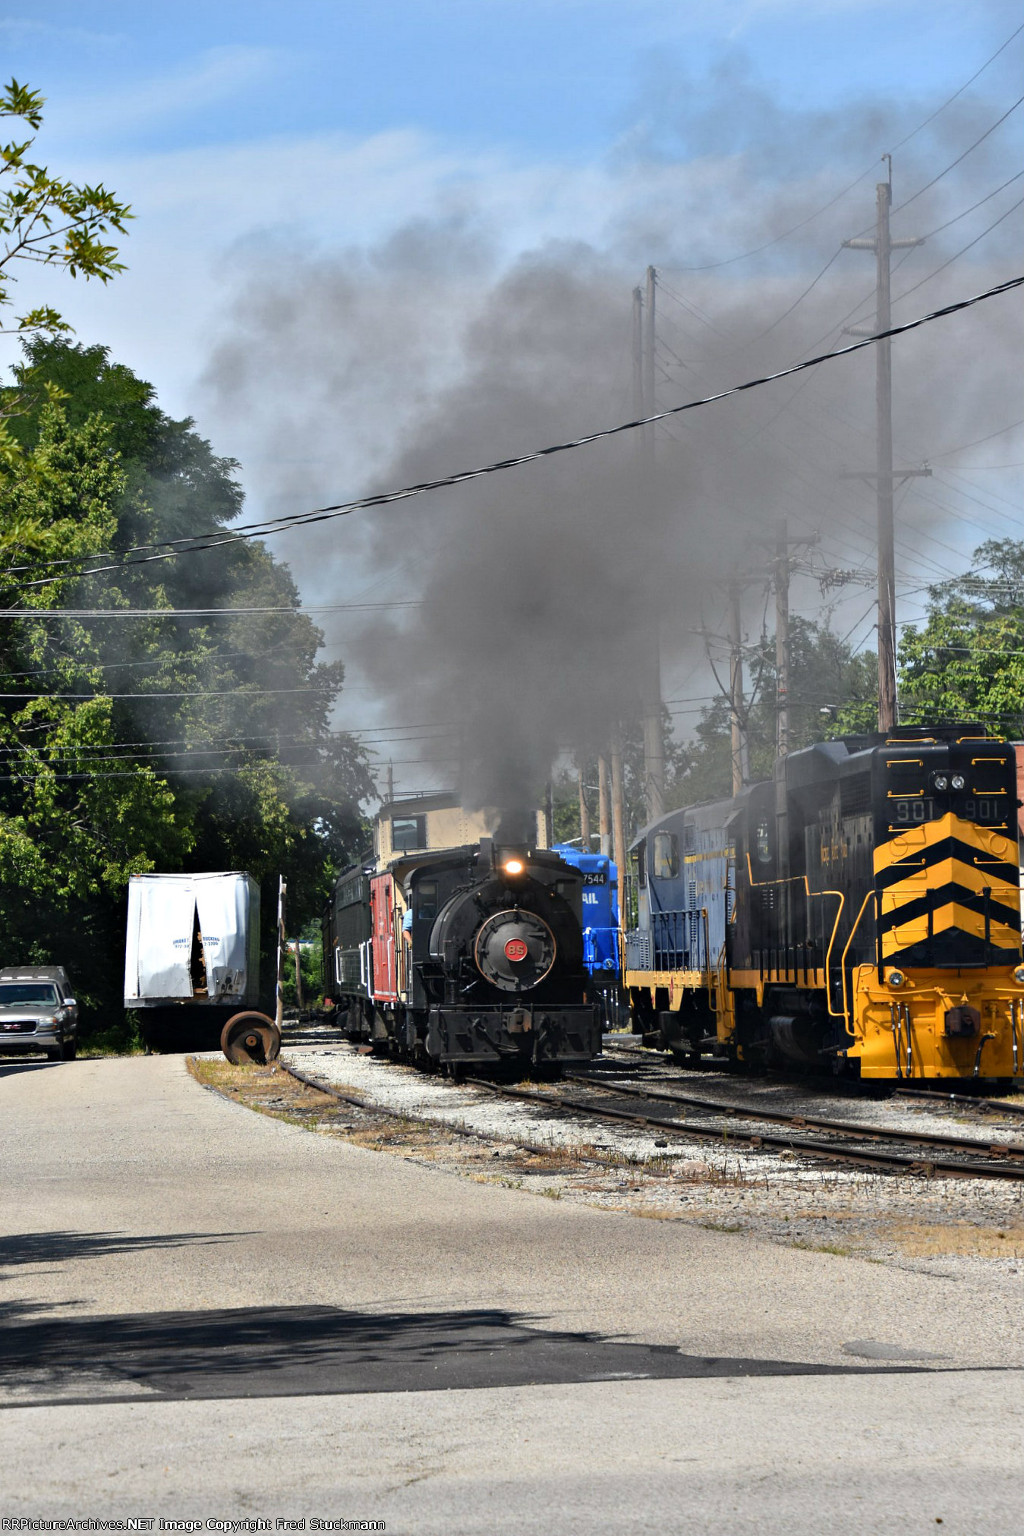 JEDDO COAL 85 shoves out of town past the resting diesels.